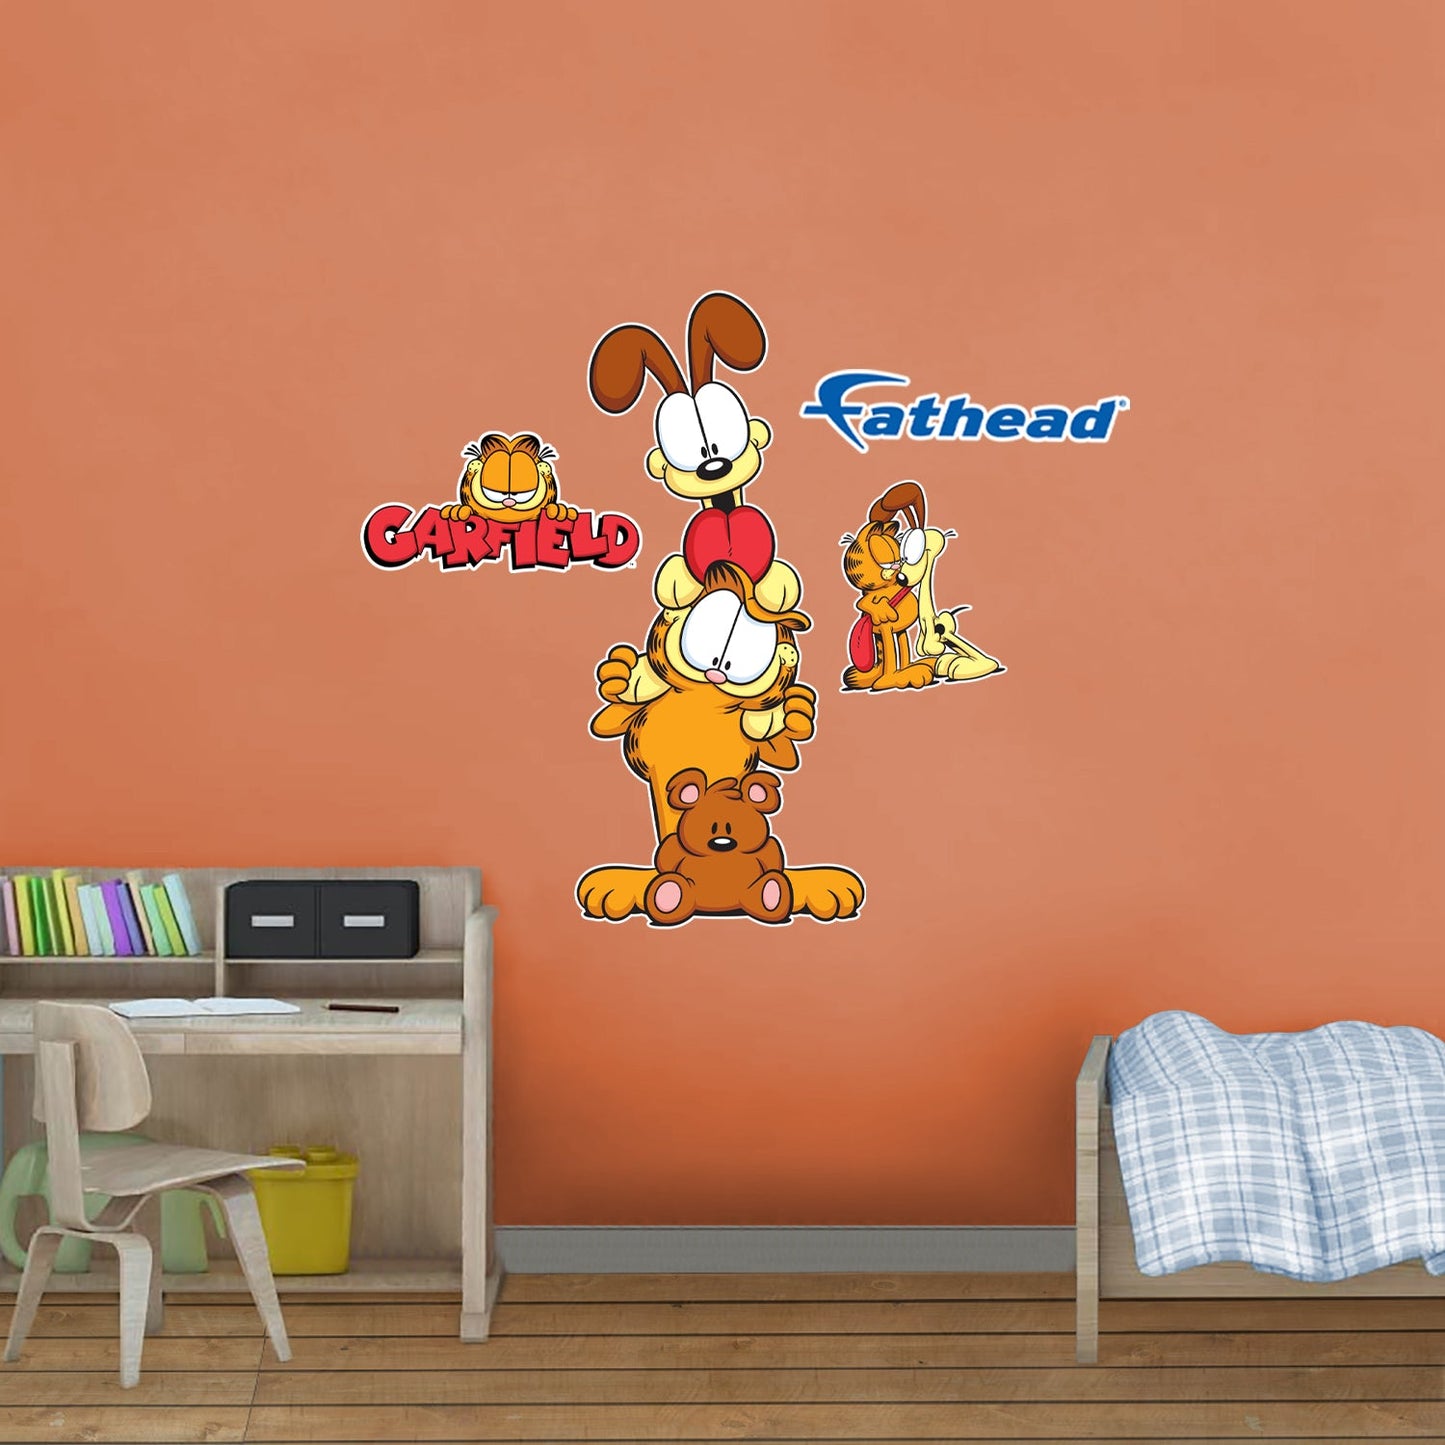 Garfield: Garfield, Odie & Pooky RealBigs - Officially Licensed Nickelodeon Removable Adhesive Decal